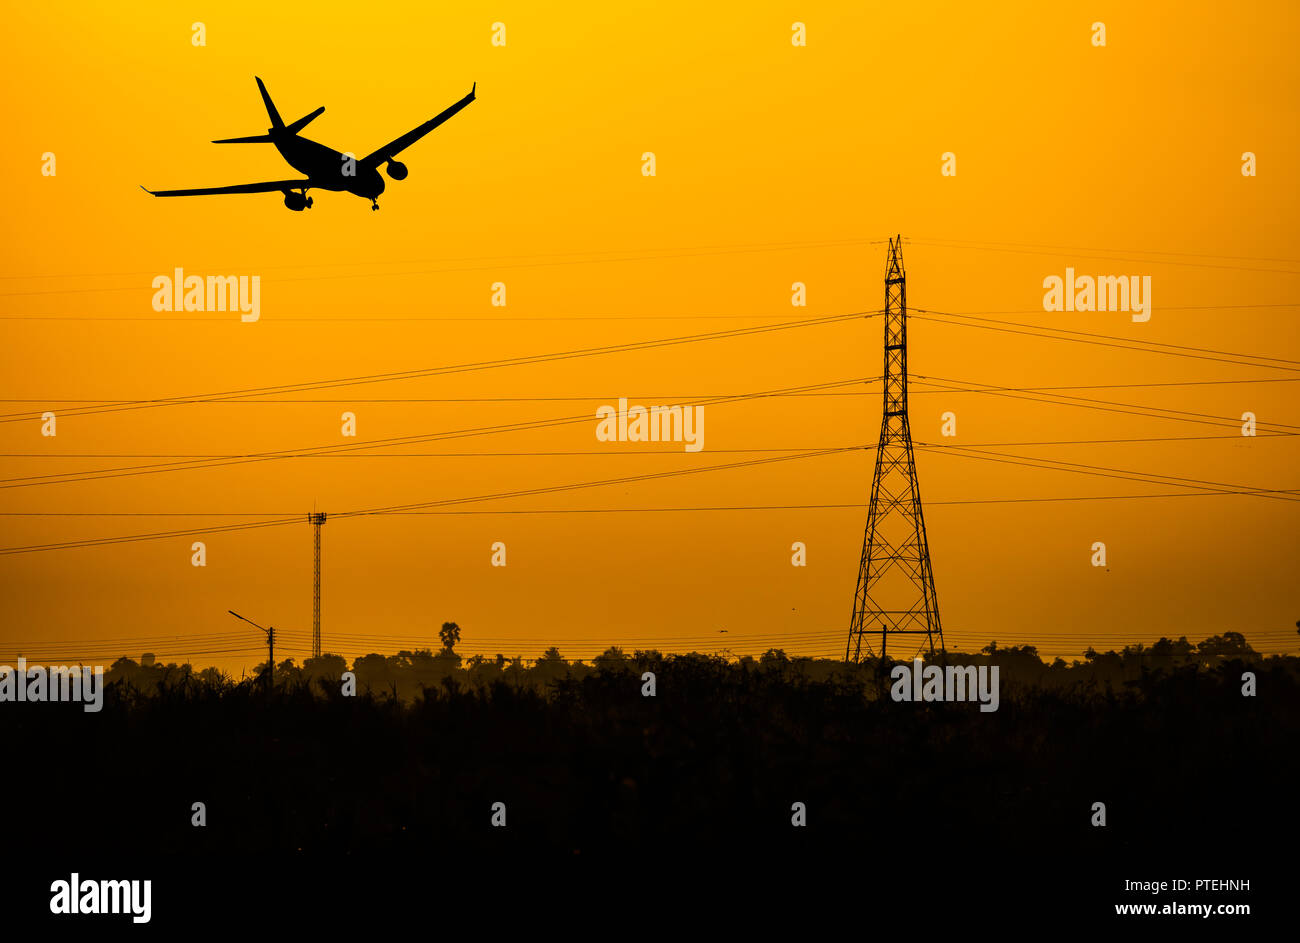 Airplane flying over the electtric pole at sunset. Stock Photo